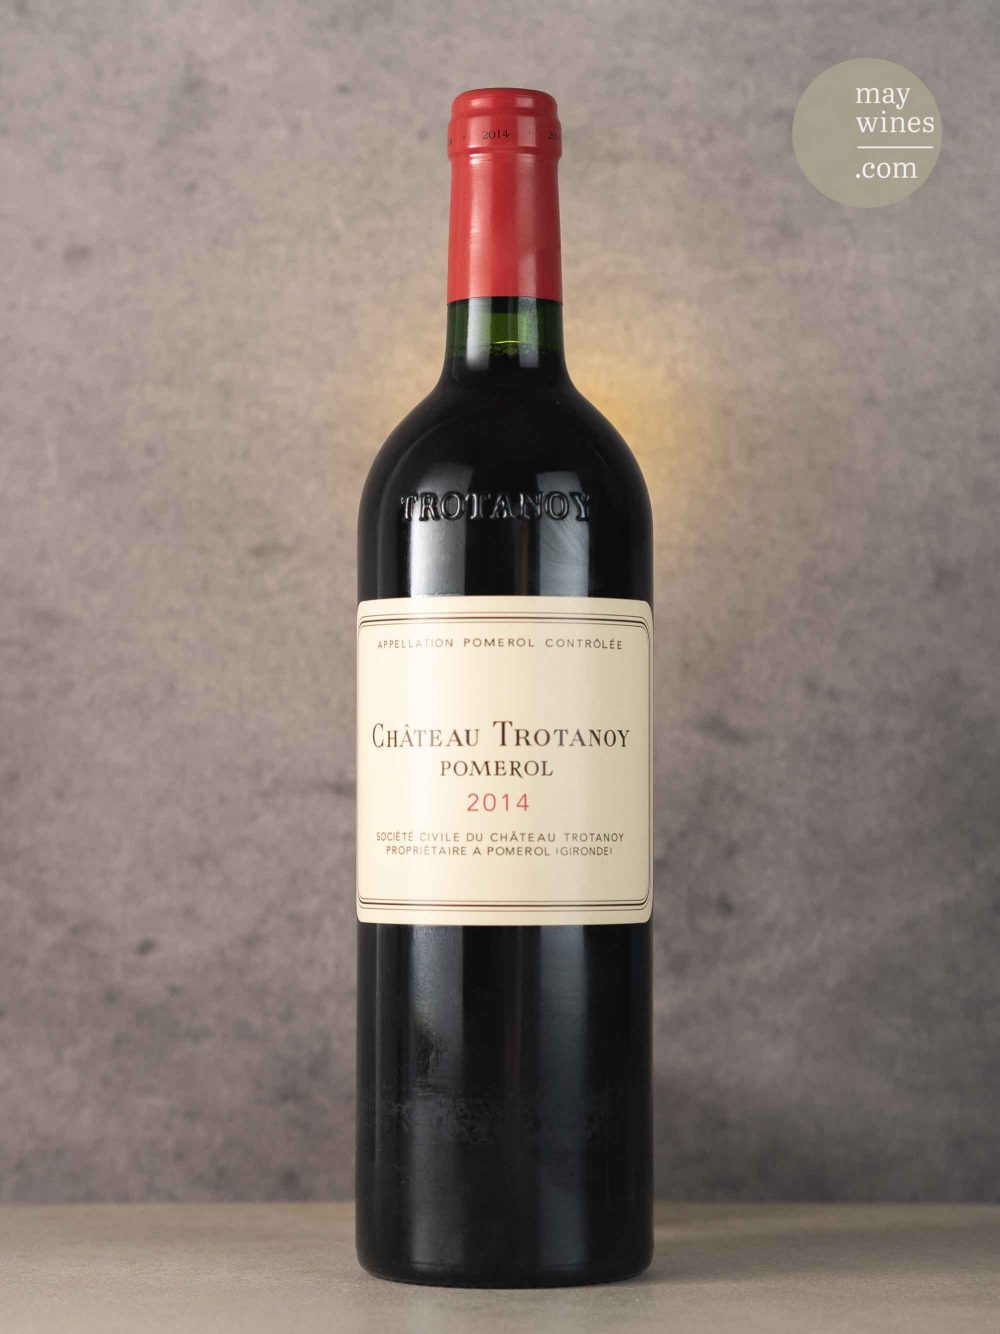 May Wines – Rotwein – 2014 Château Trotanoy